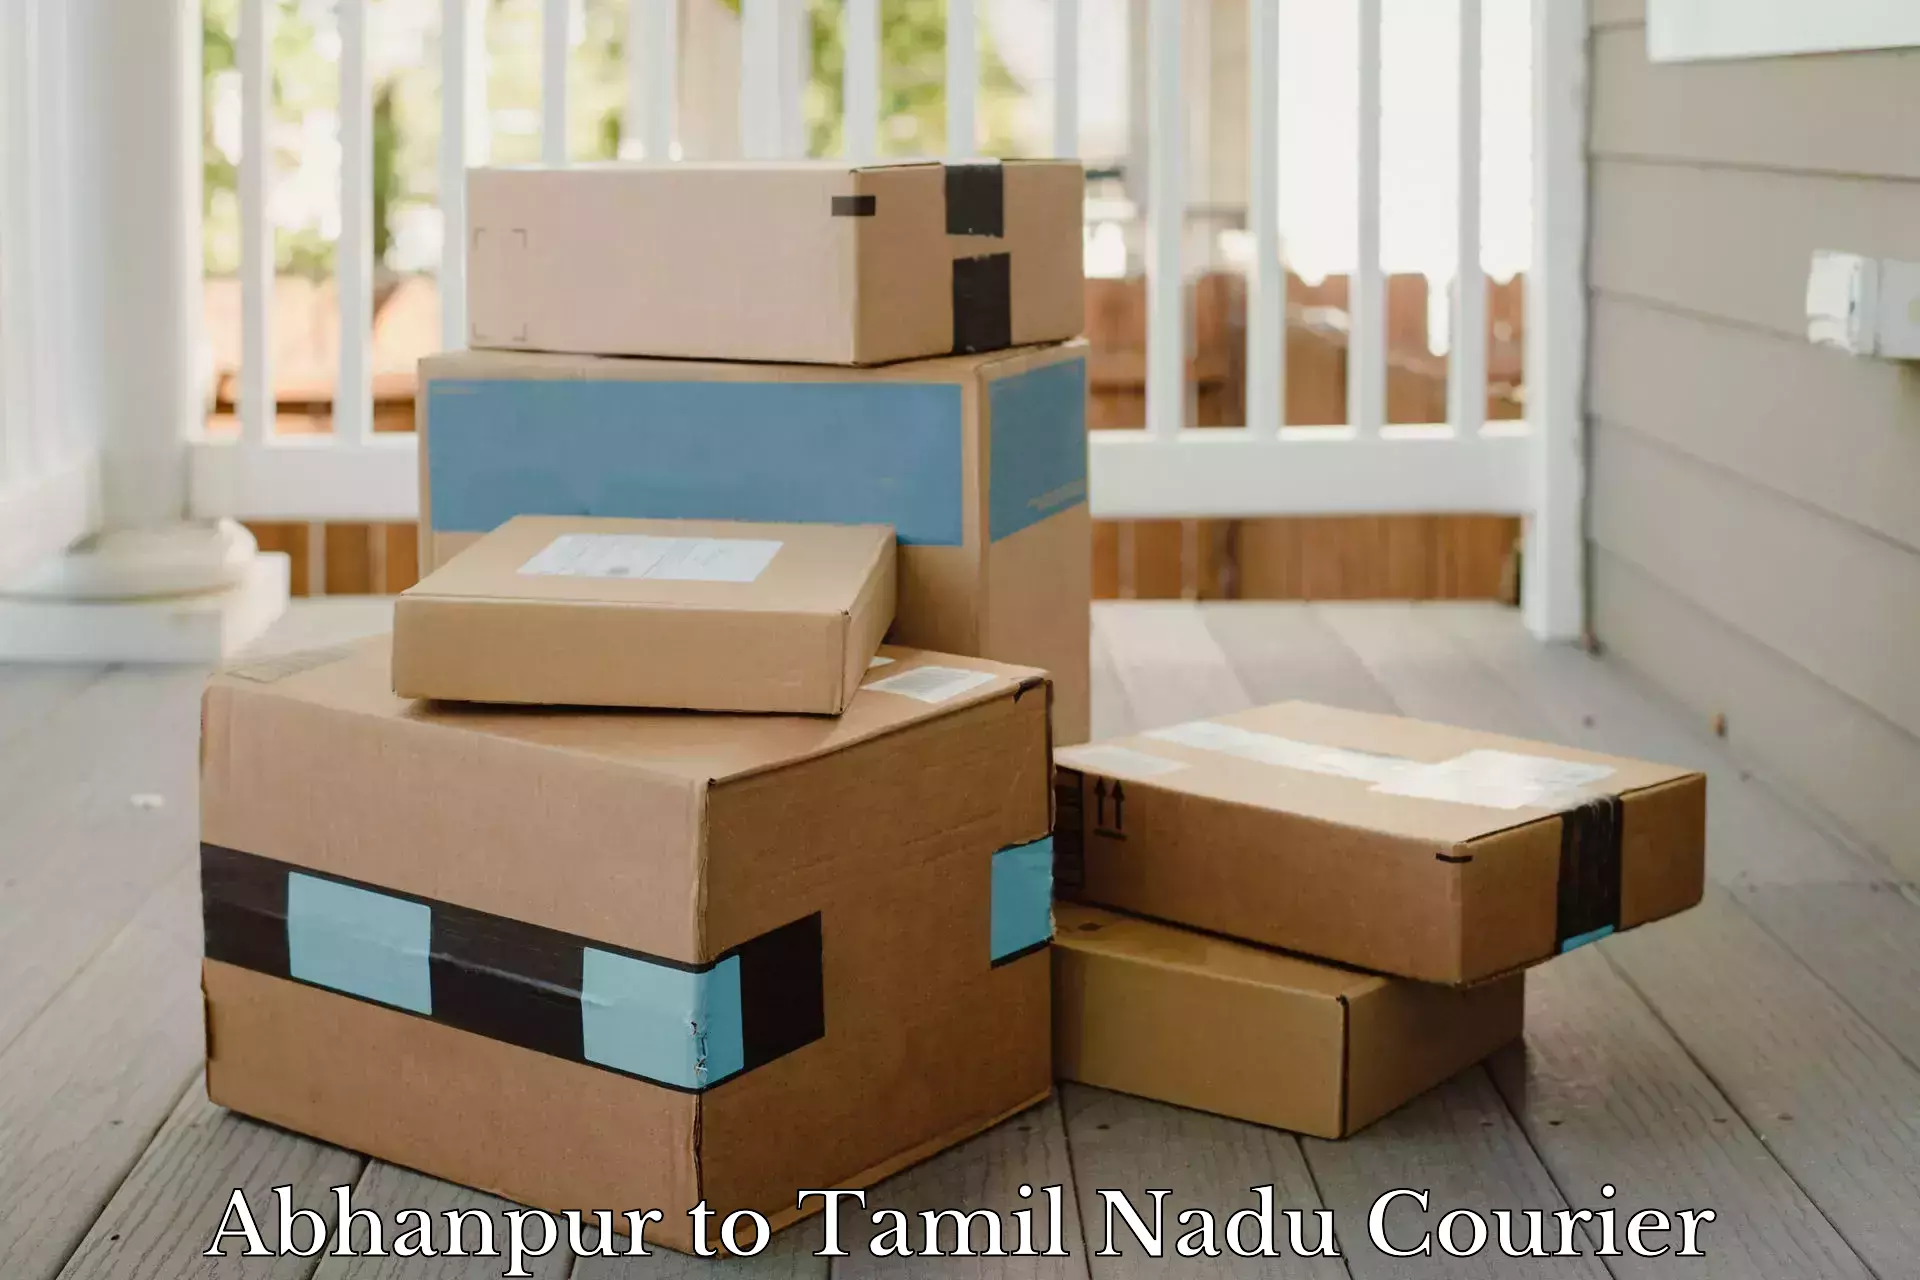 Full-service courier options Abhanpur to Chengam